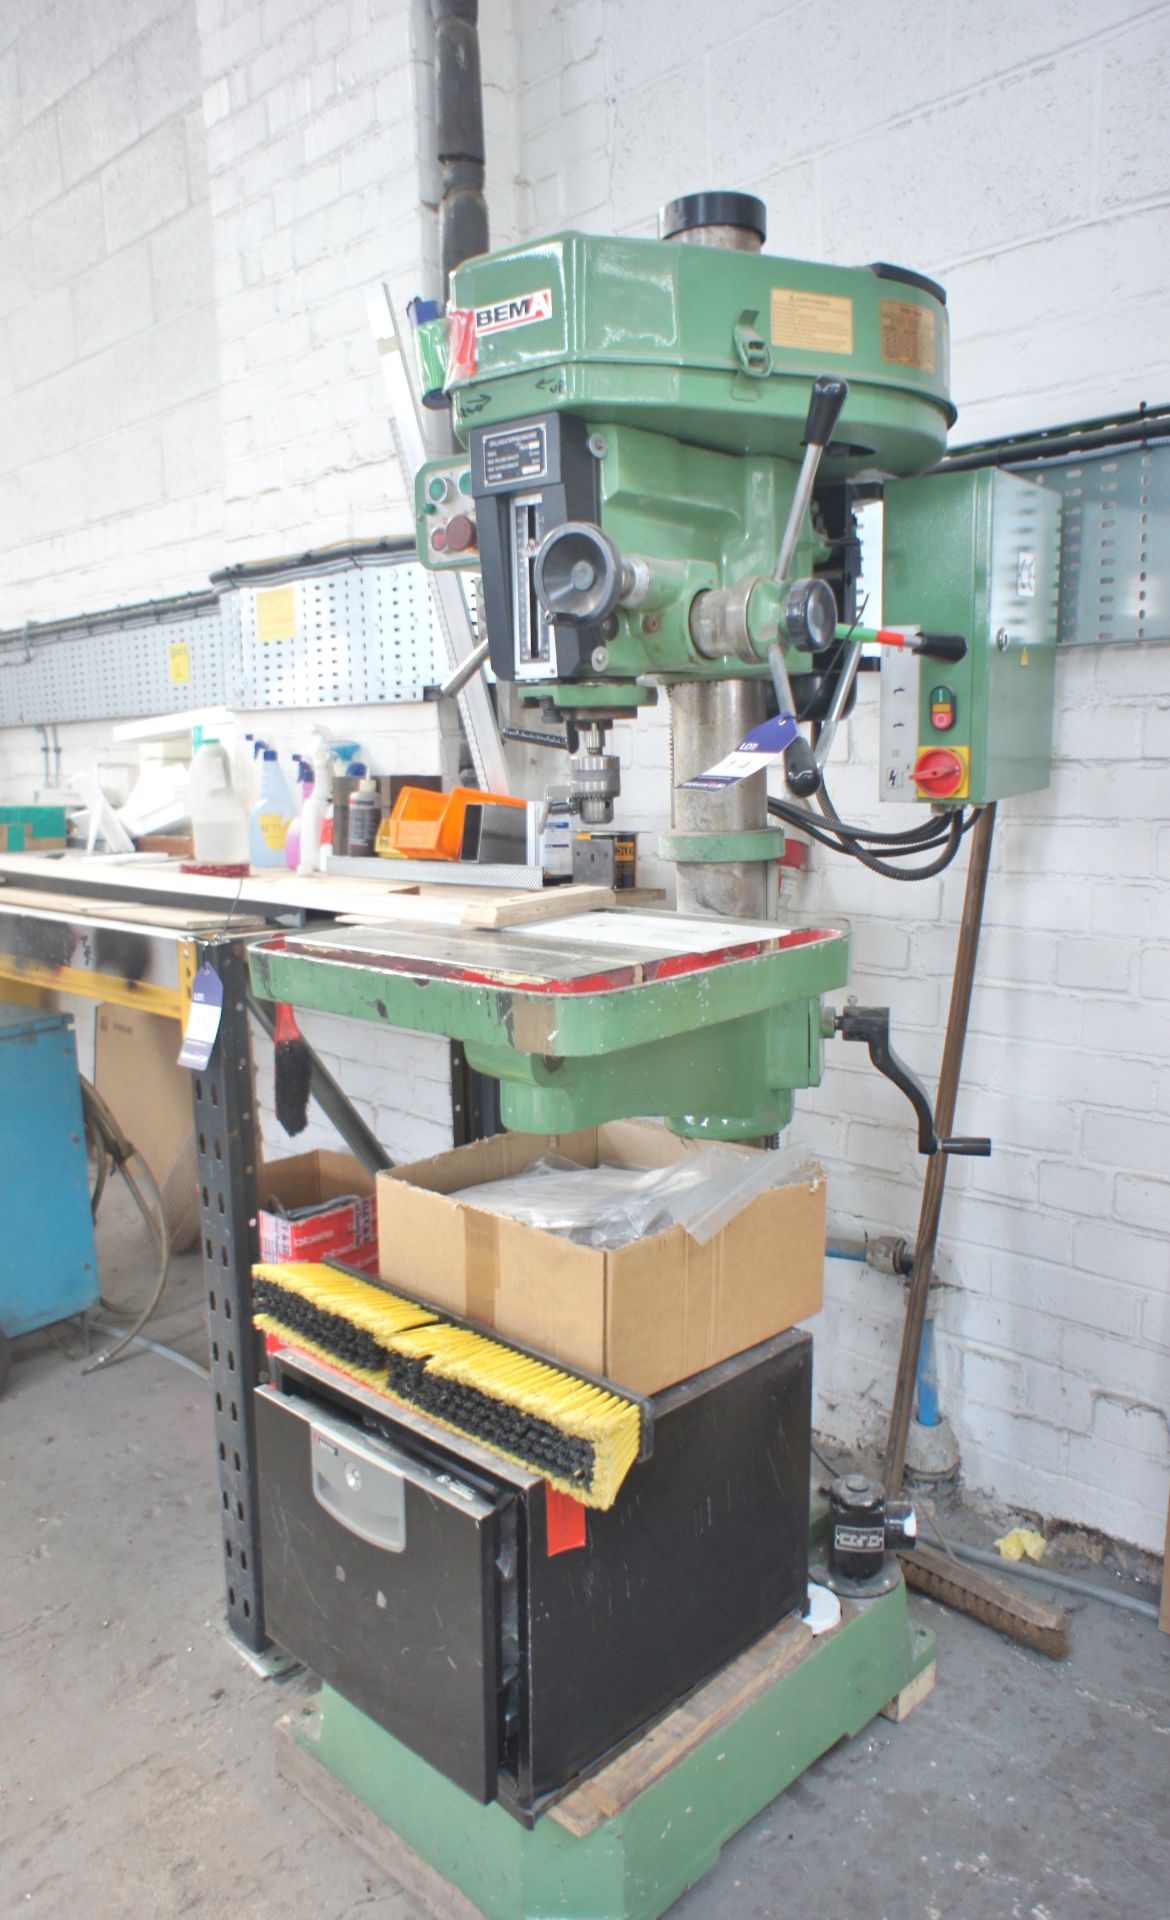 Bema MG32C Drilling / Tapping machine, s/n 1401021 - Image 2 of 5